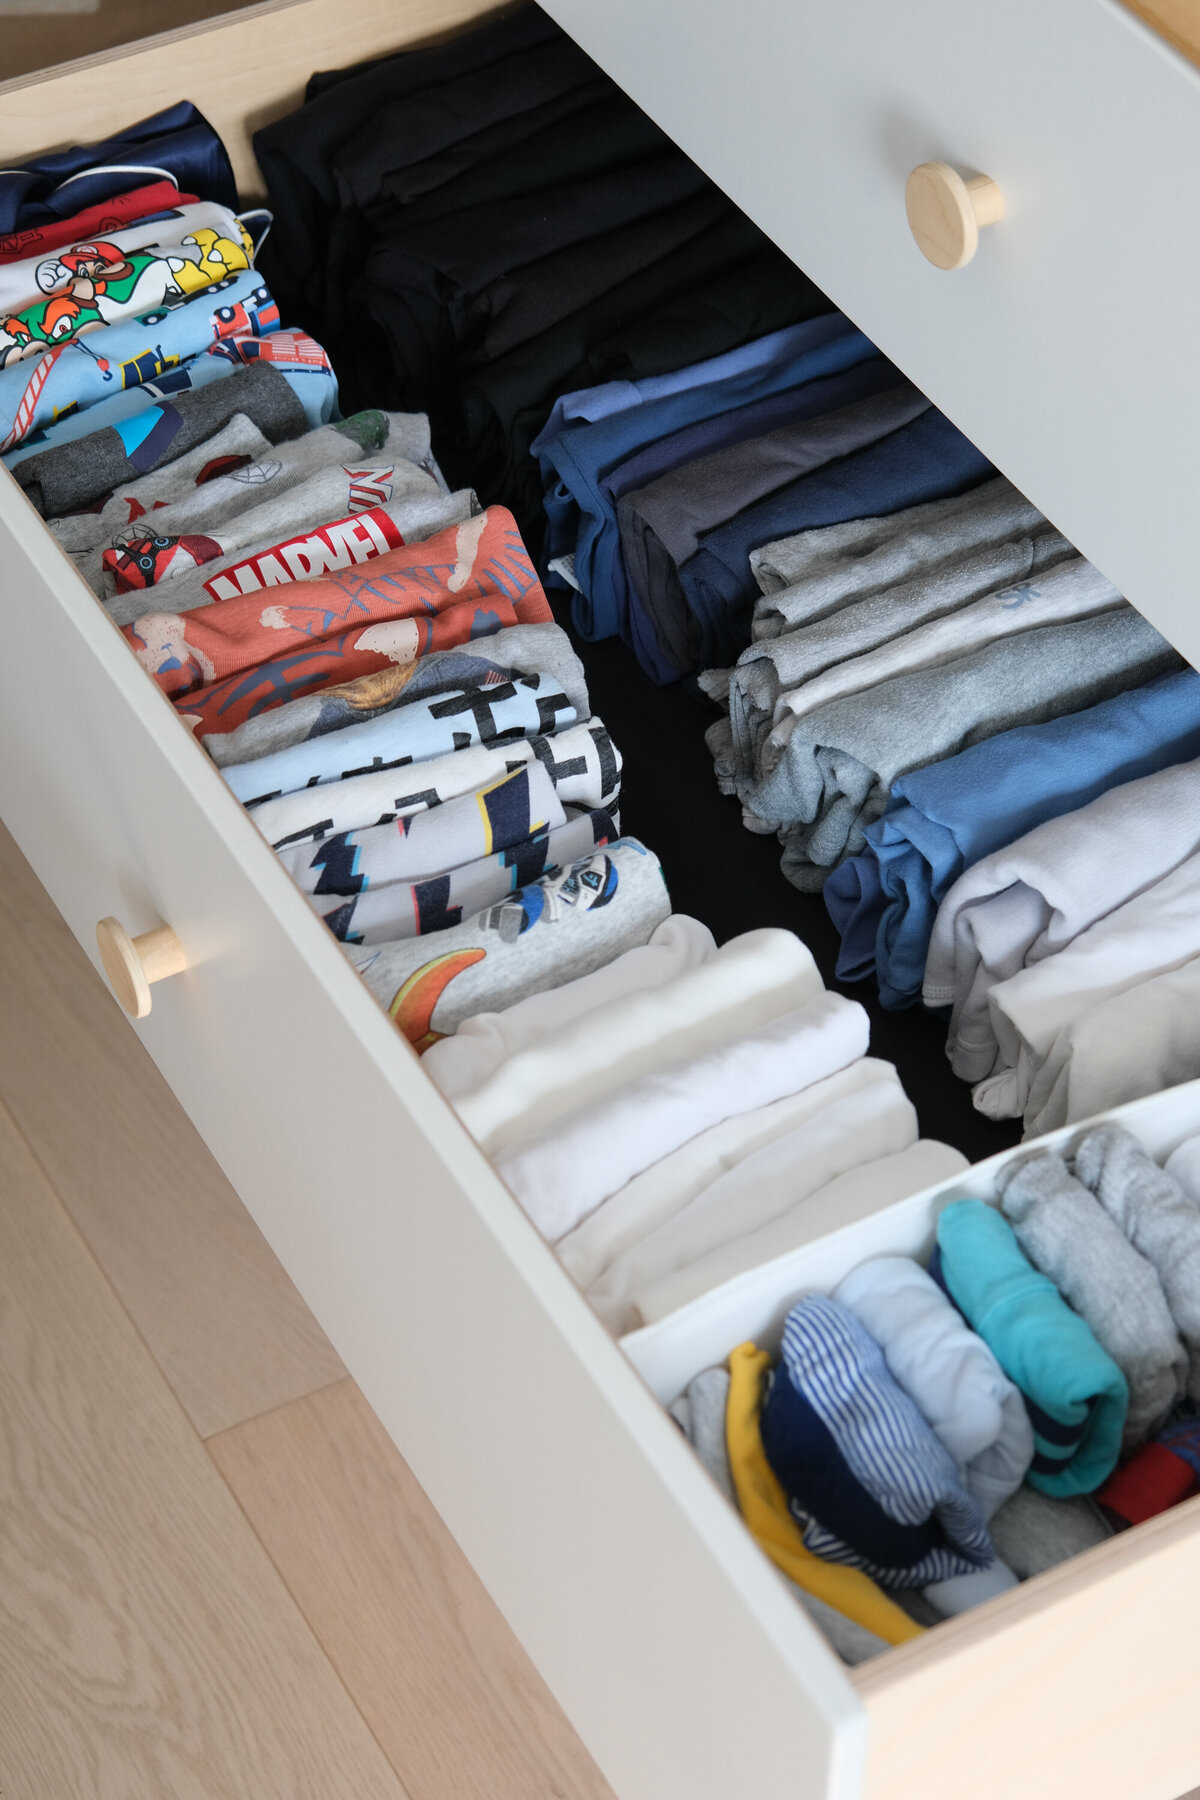 Organization Projects - Closet - Bless the Mess19